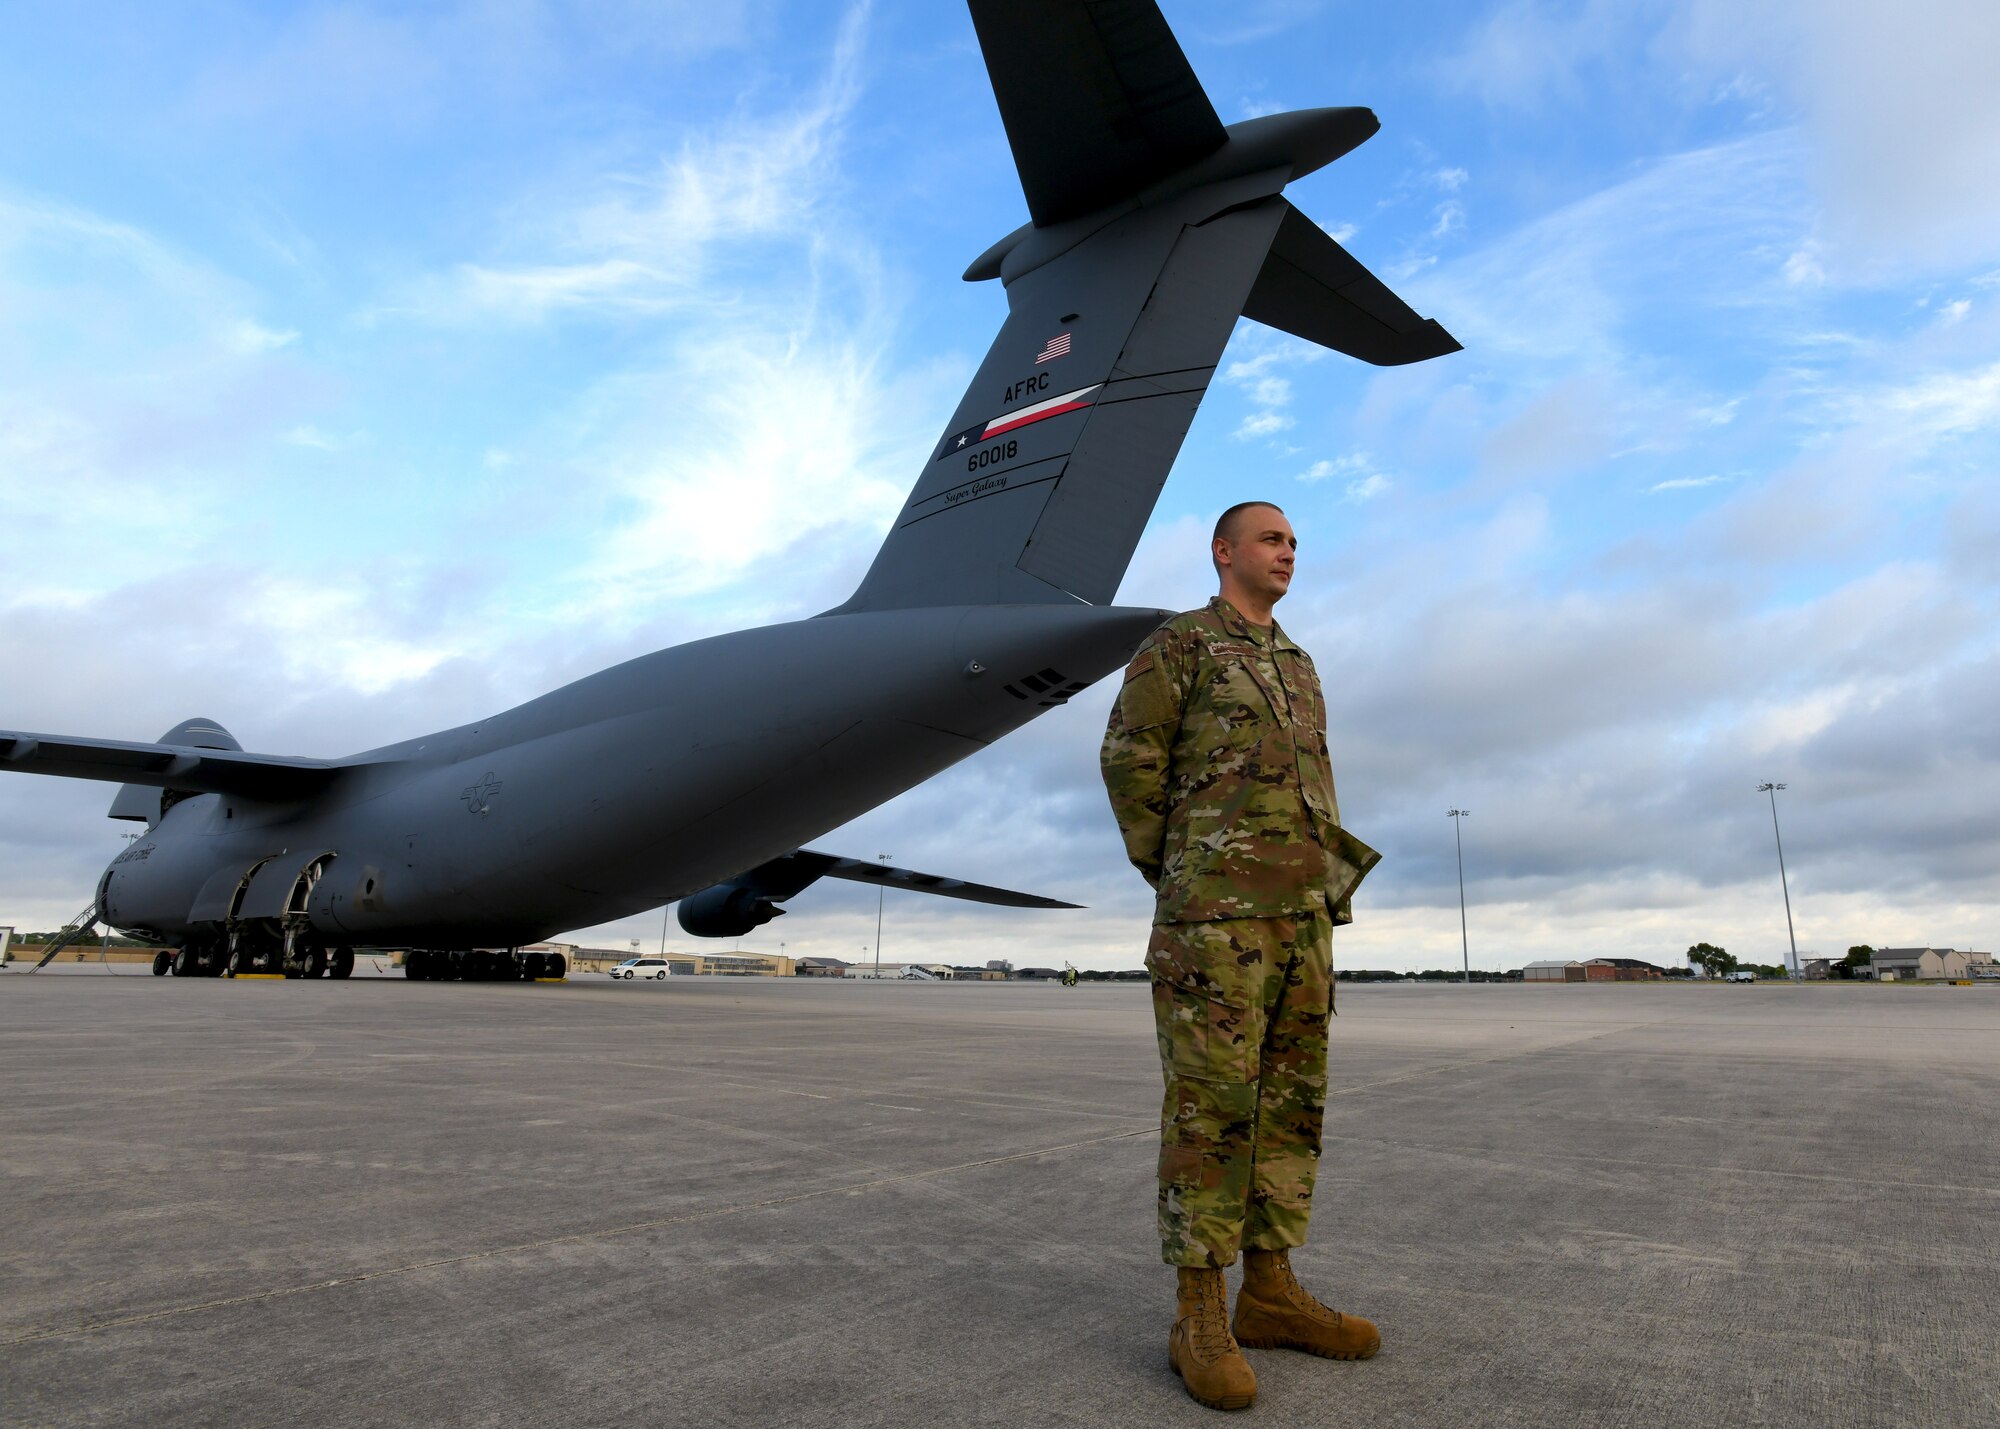 Tech. Sgt. Muris Secerbegovic, 433rd Maintenance Group quality assurance inspector, stands near a C-5M Super Galaxy July 22, 2020, at Joint Base San Antonio-Lackland, Texas.